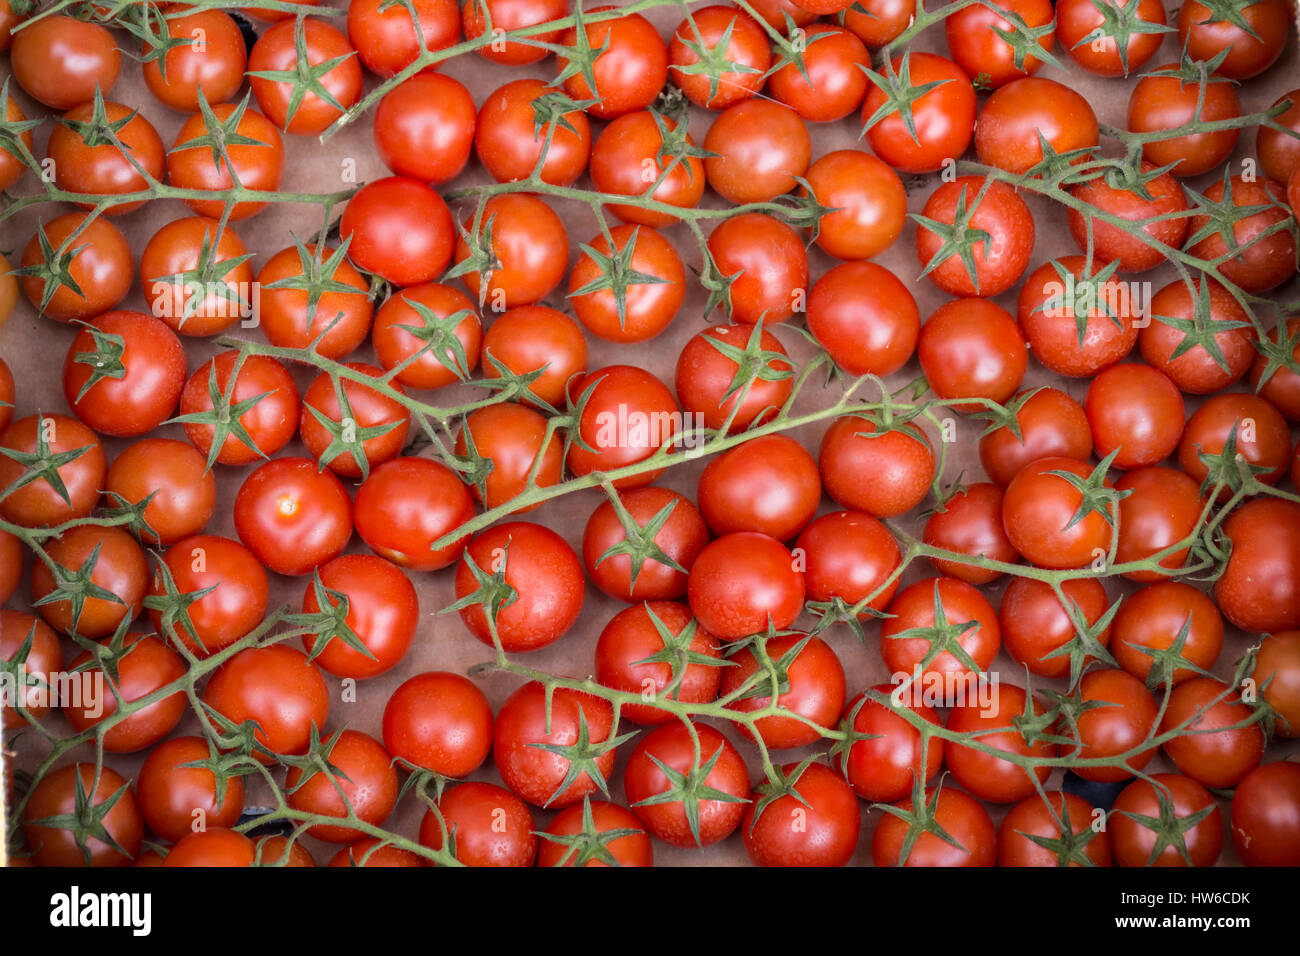 Bunch of cherry tomatoes in a market stall, Venice, Italy Stock Photo